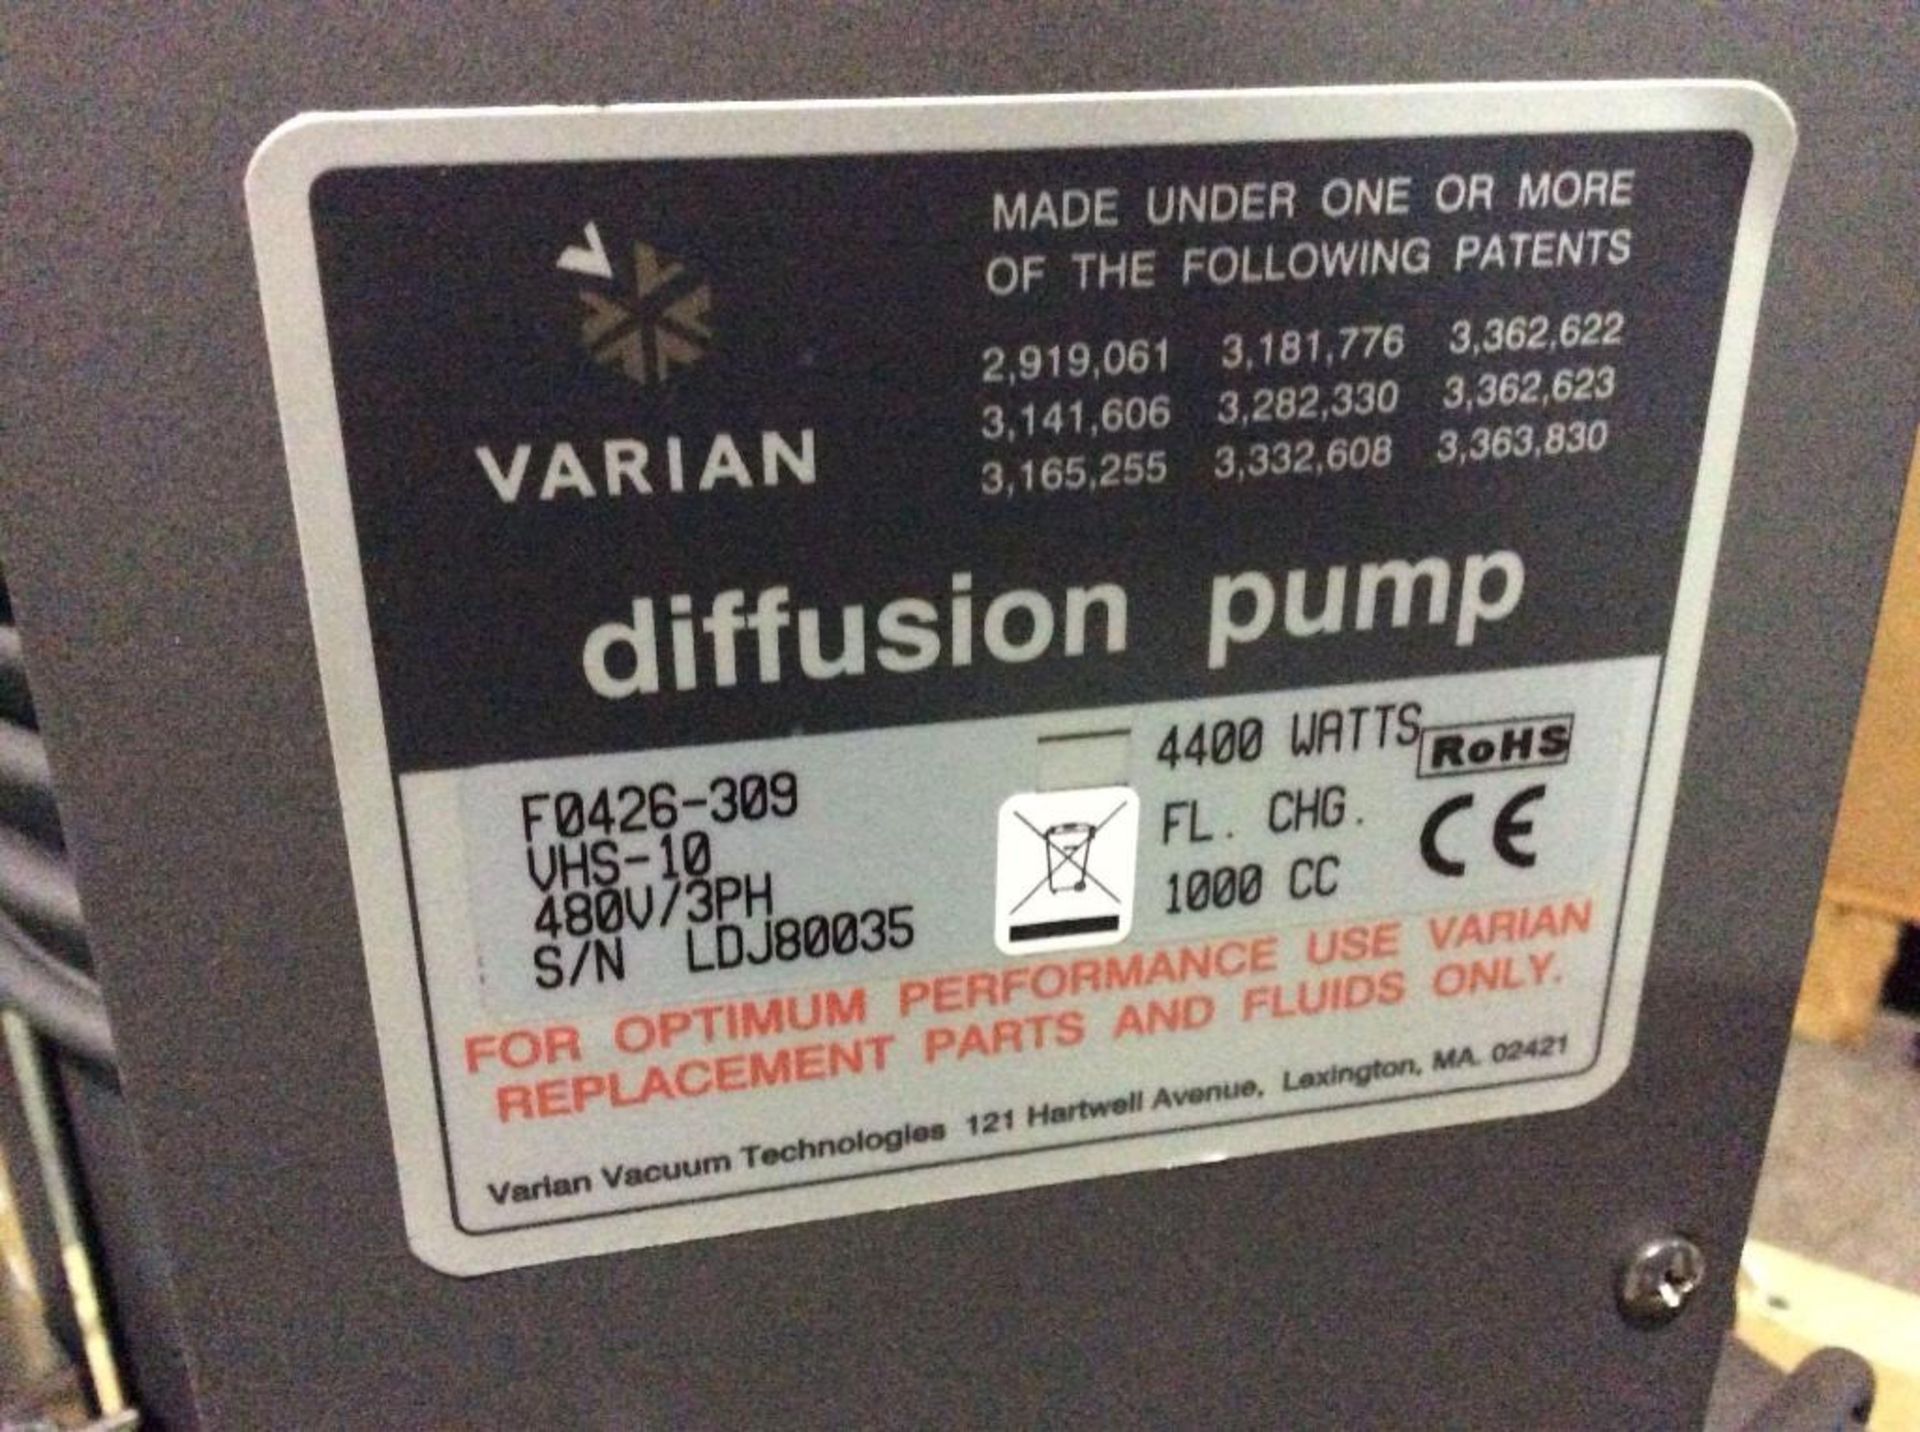 Varian 10" diffusion pump, mn VHS-10, 480 volt, 3 phase (NEW ON SKIDS) - Image 2 of 3